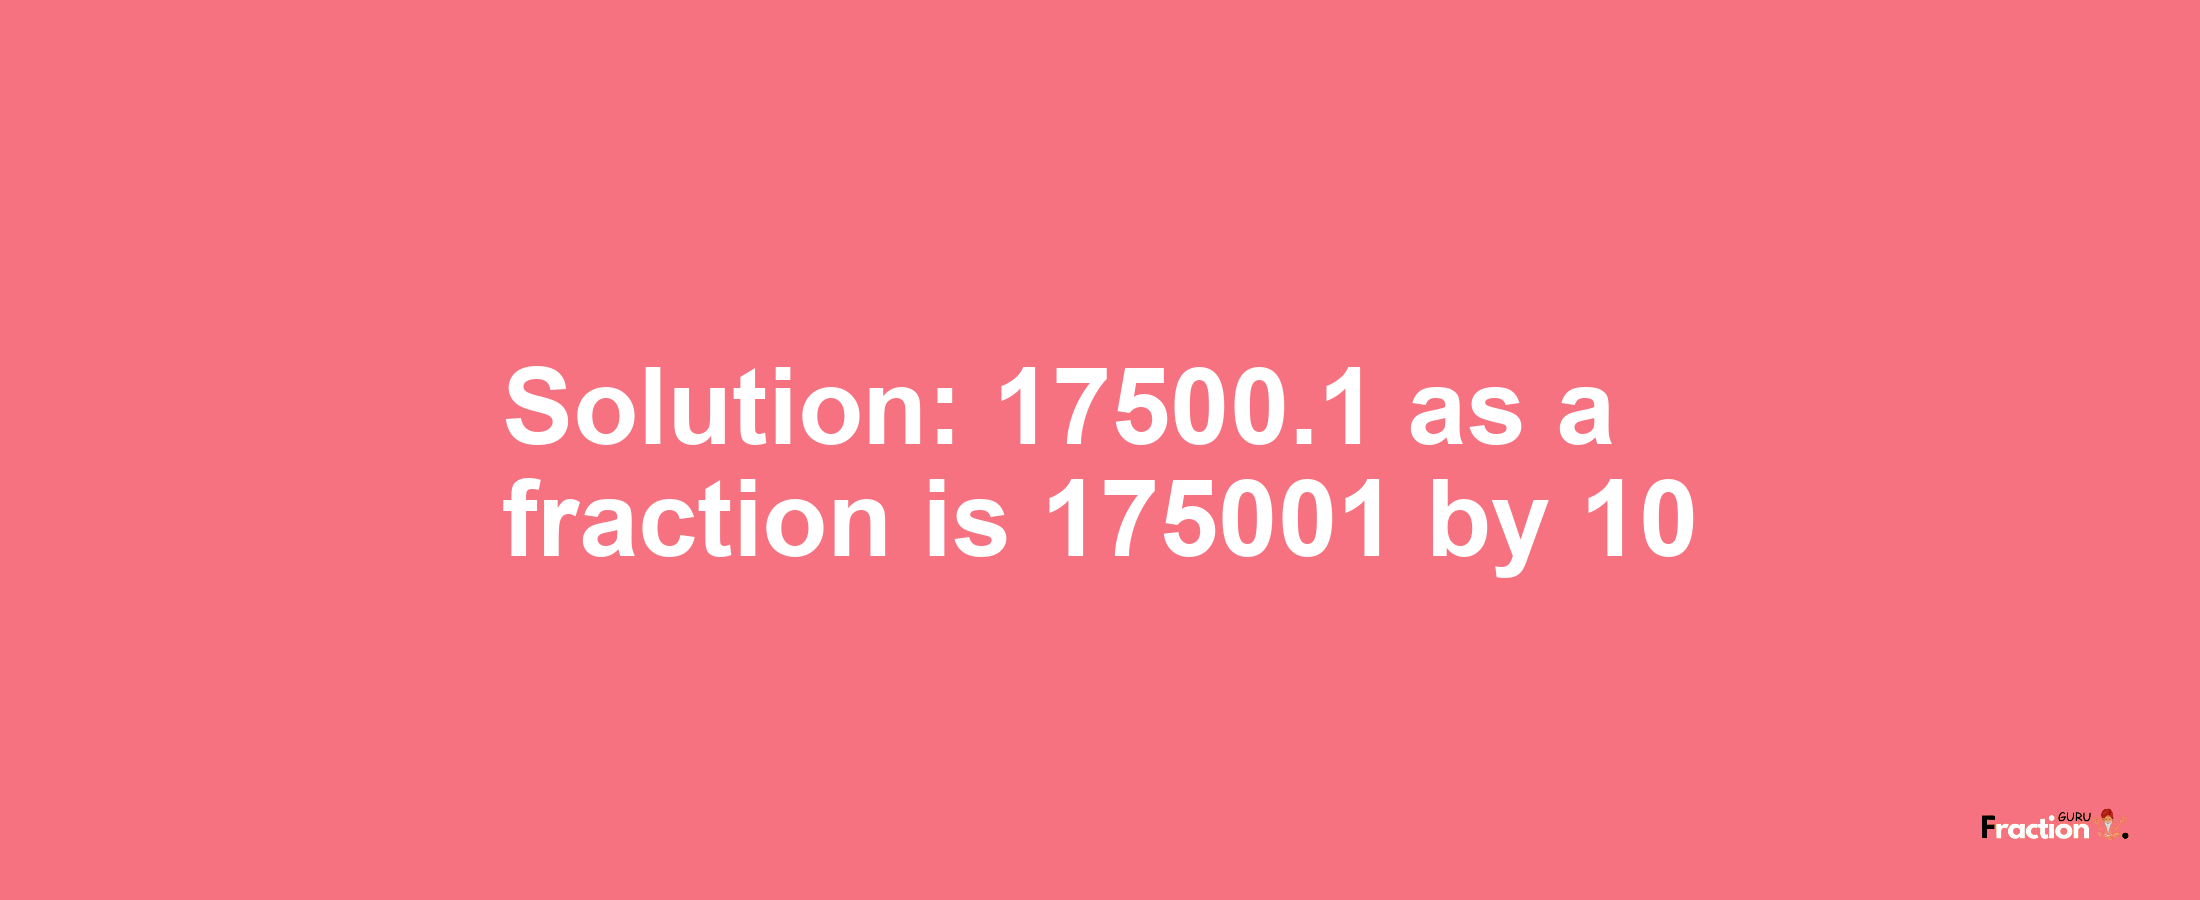 Solution:17500.1 as a fraction is 175001/10